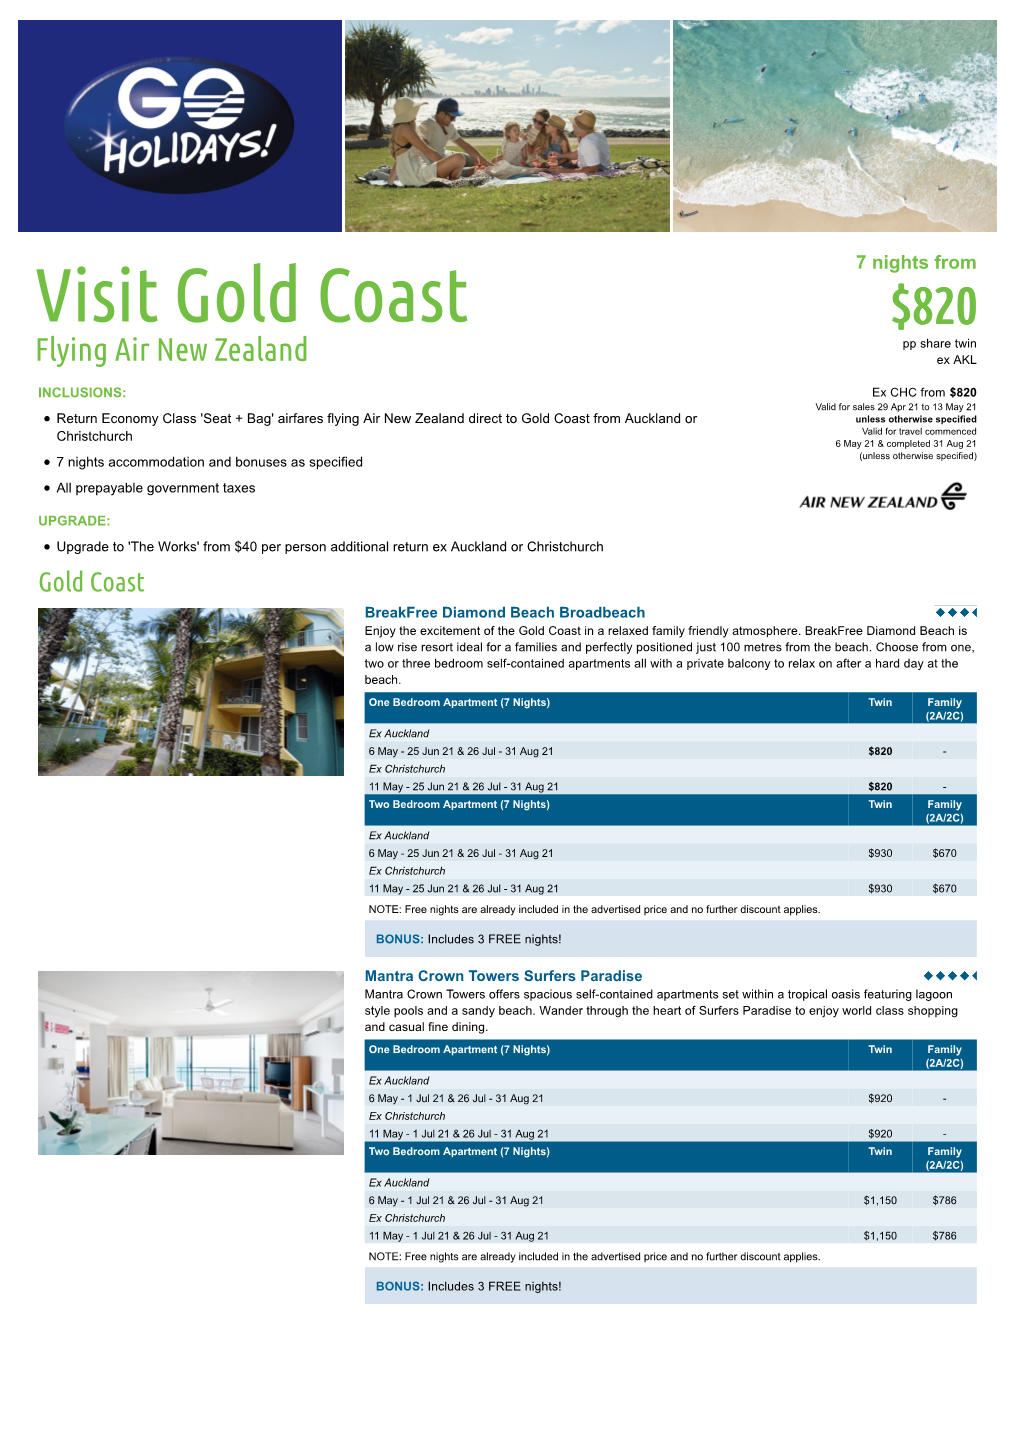 Visit Gold Coast $820 Pp Share Twin Flying Air New Zealand Ex AKL